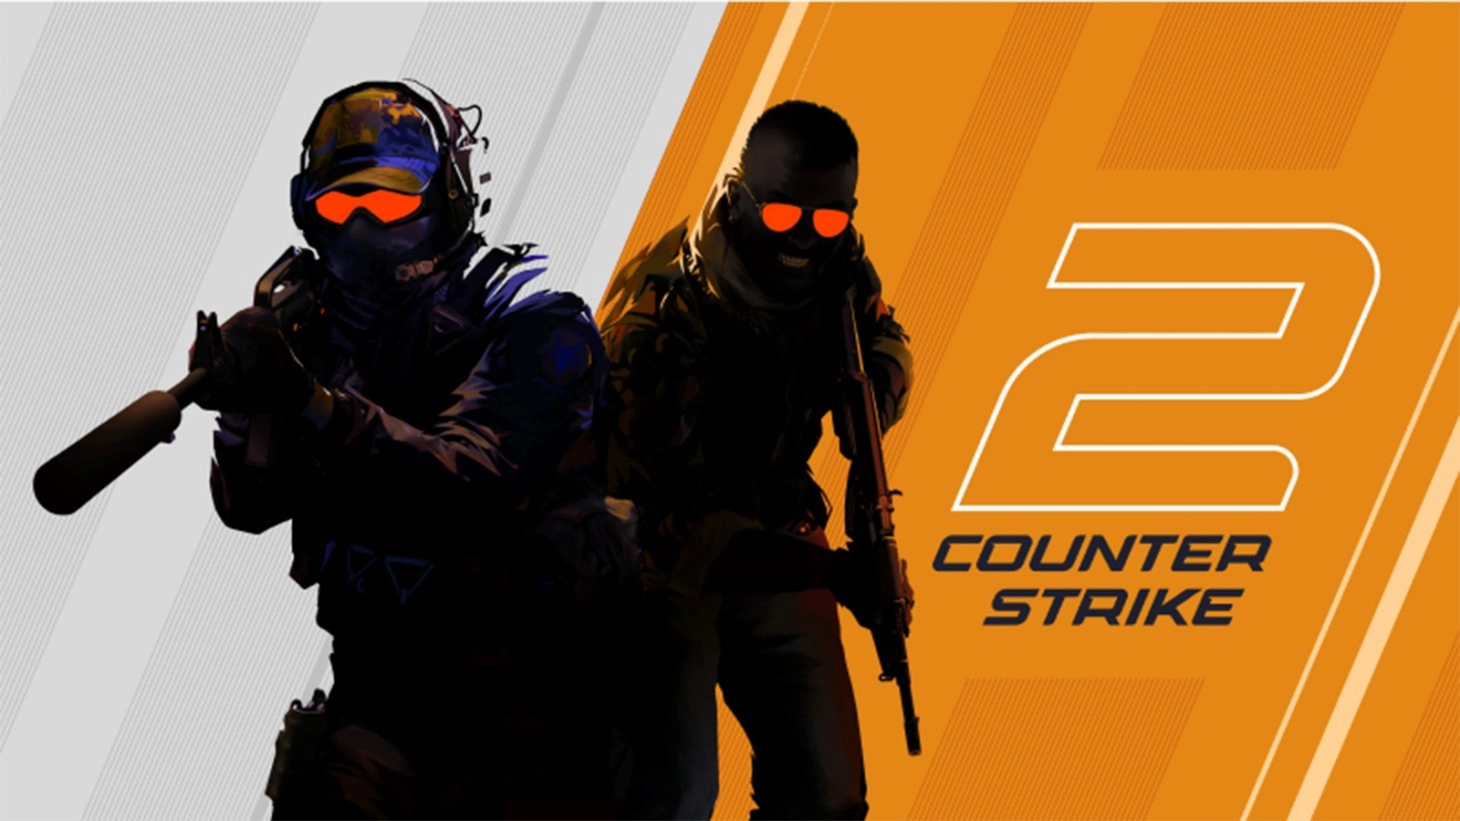 Counter-Strike 2: A Surprise Package Now On Steam